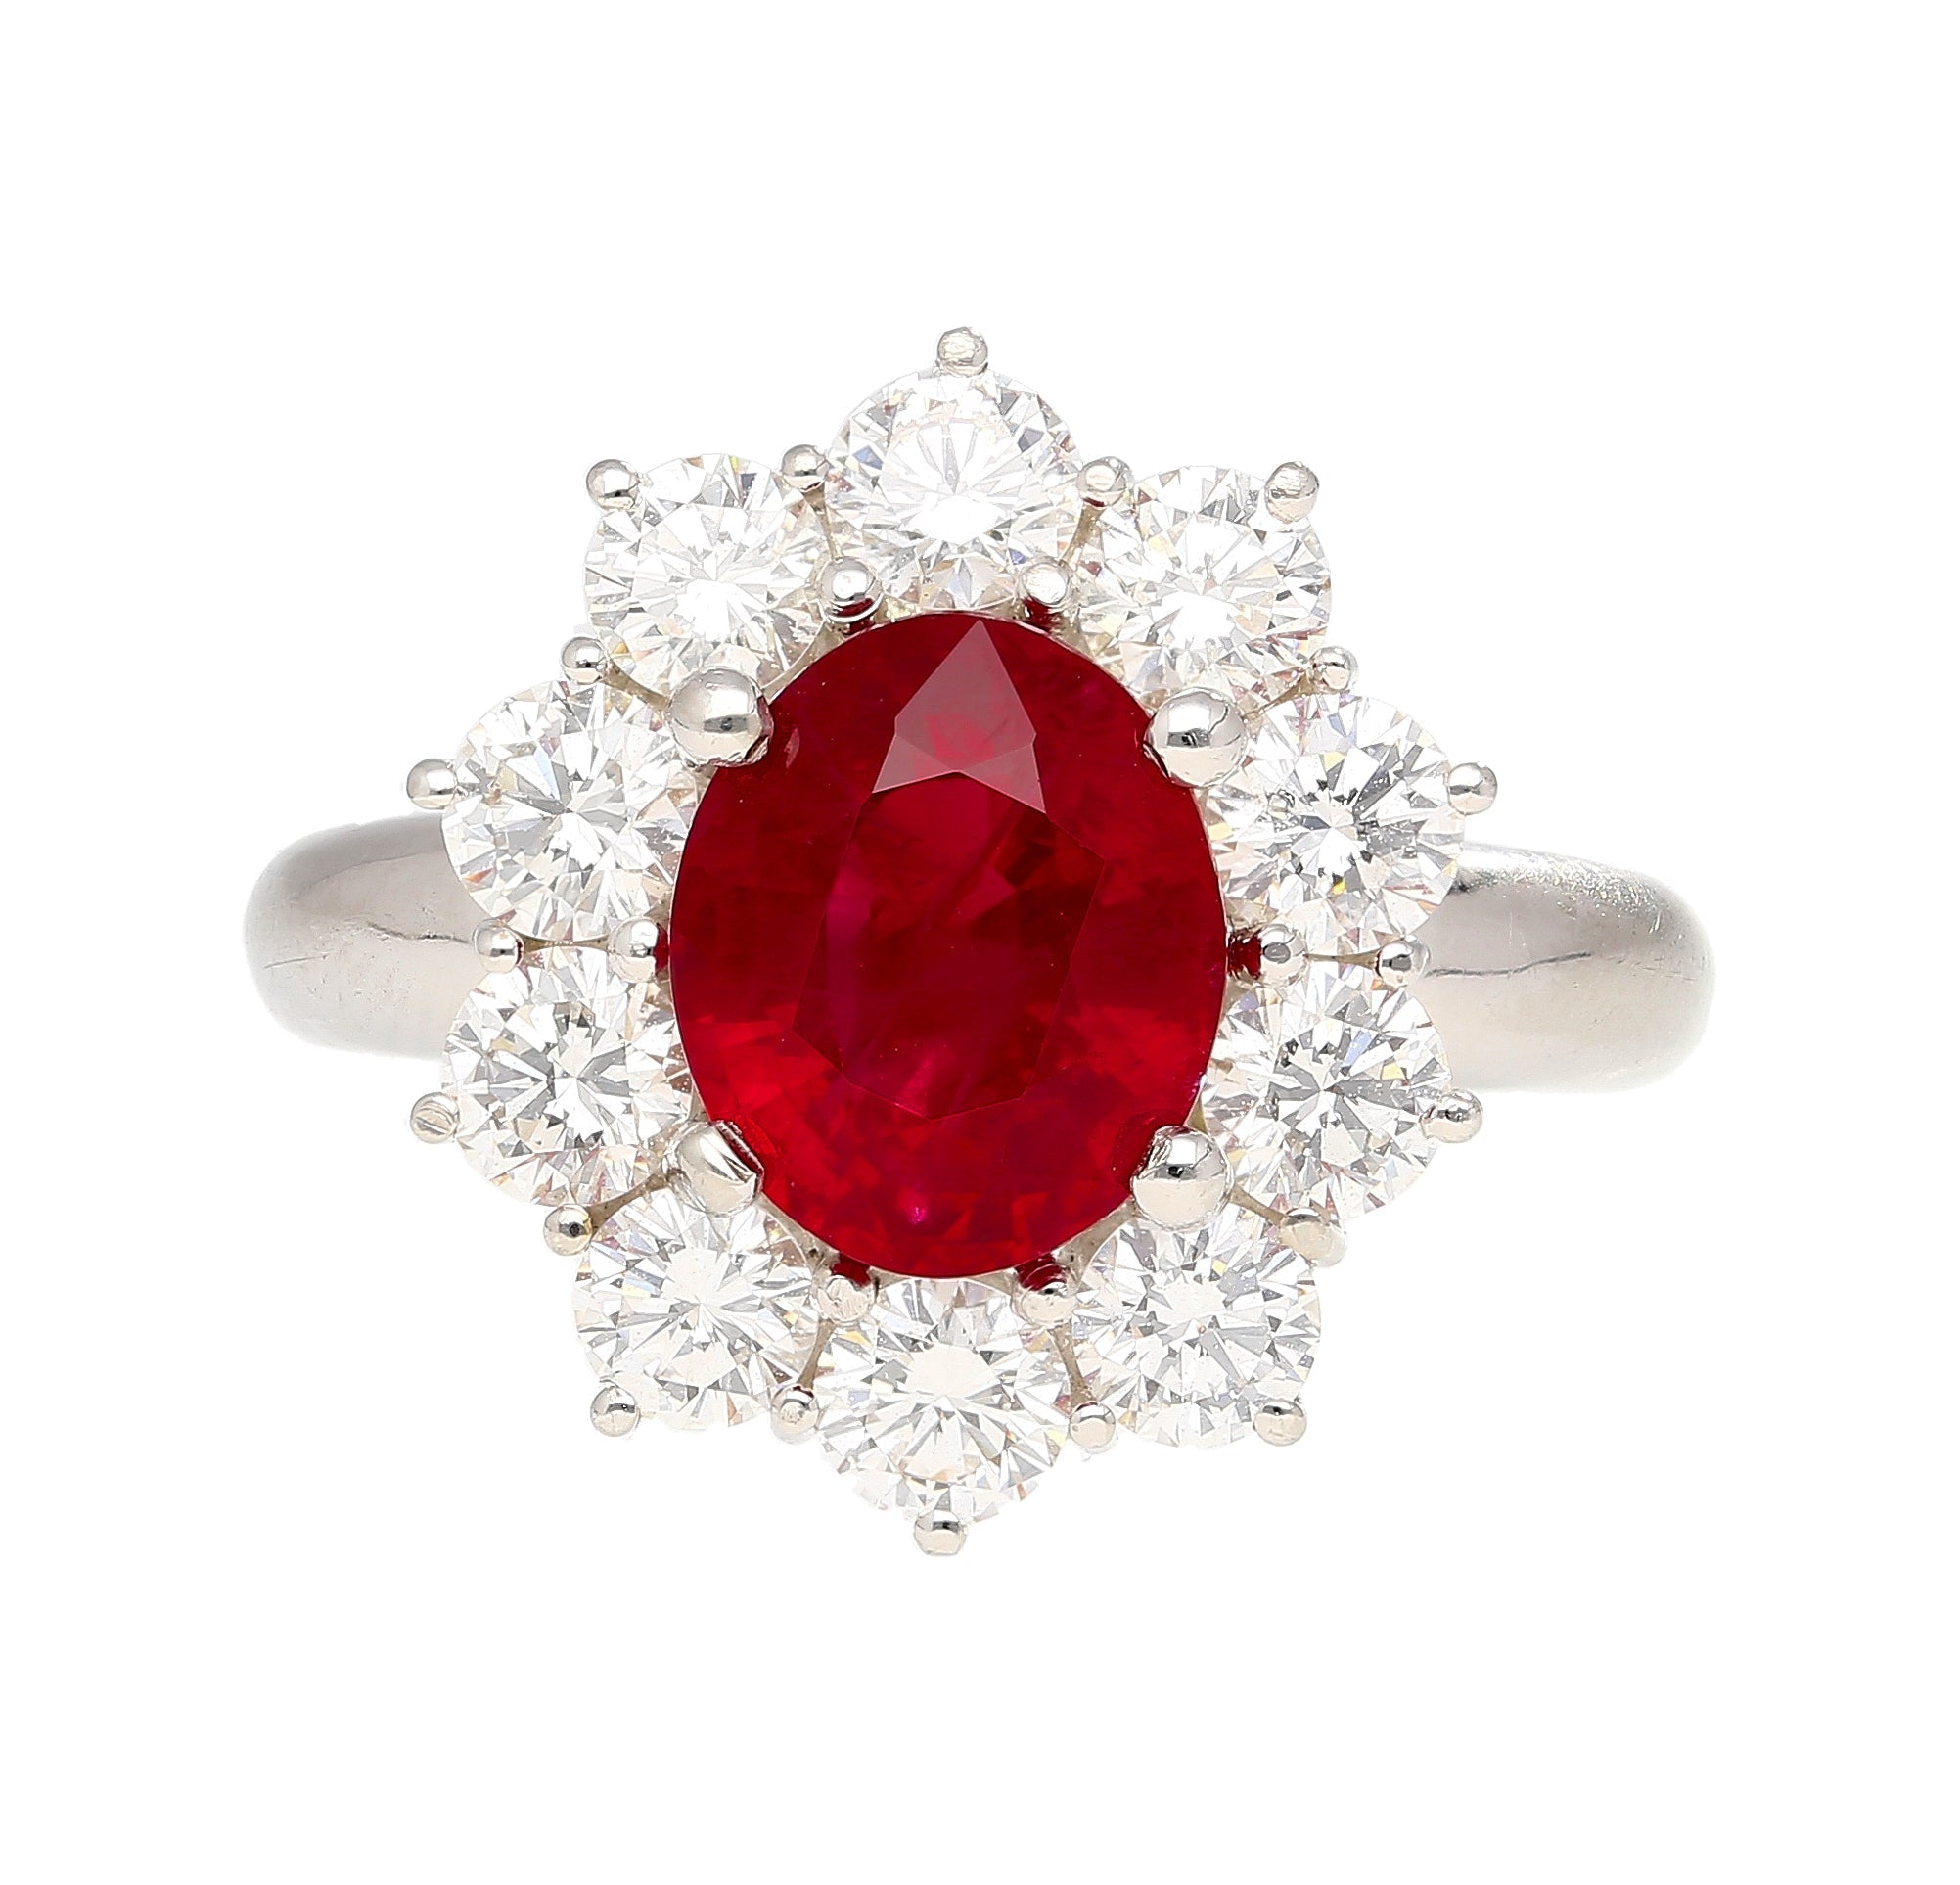 GRS Certified 3 carat Vivid Red "Pigeon Blood" Oval Cut Burma Ruby Ring with Diamond Halo-Rings-ASSAY